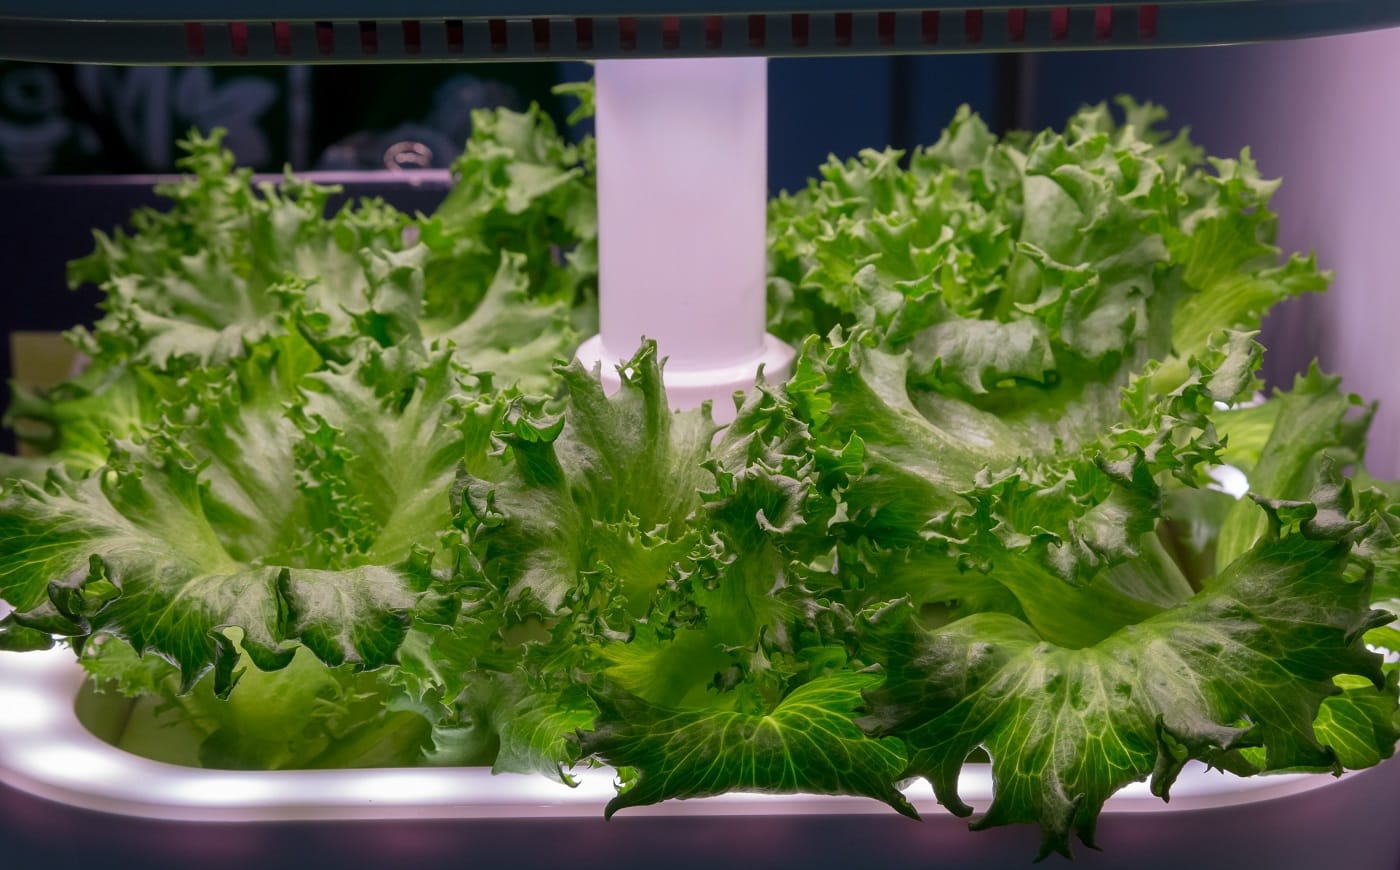 Vegetable growing with LED Light Indoor farm, Agriculture Technology. Organic hydroponic Brassica chinensis